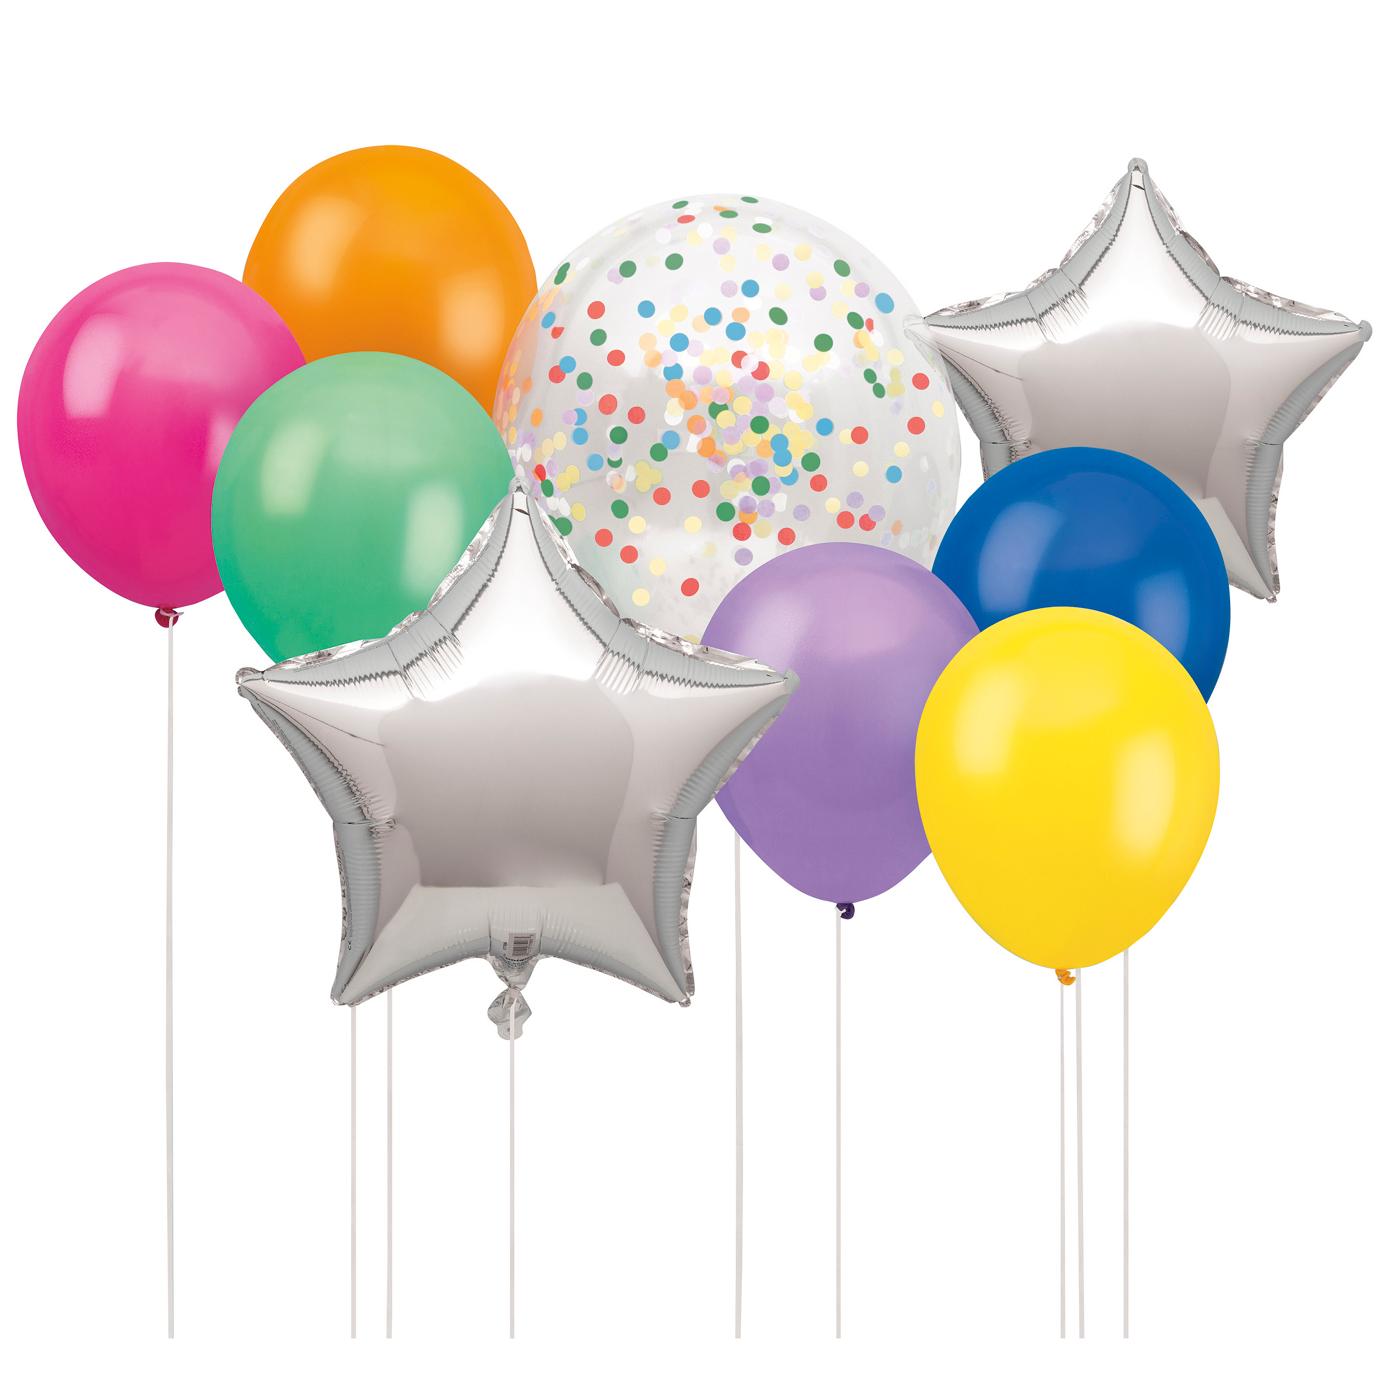 BLOOMS by H-E-B Happy Birthday Balloon Bouquet - Shop Balloons at H-E-B